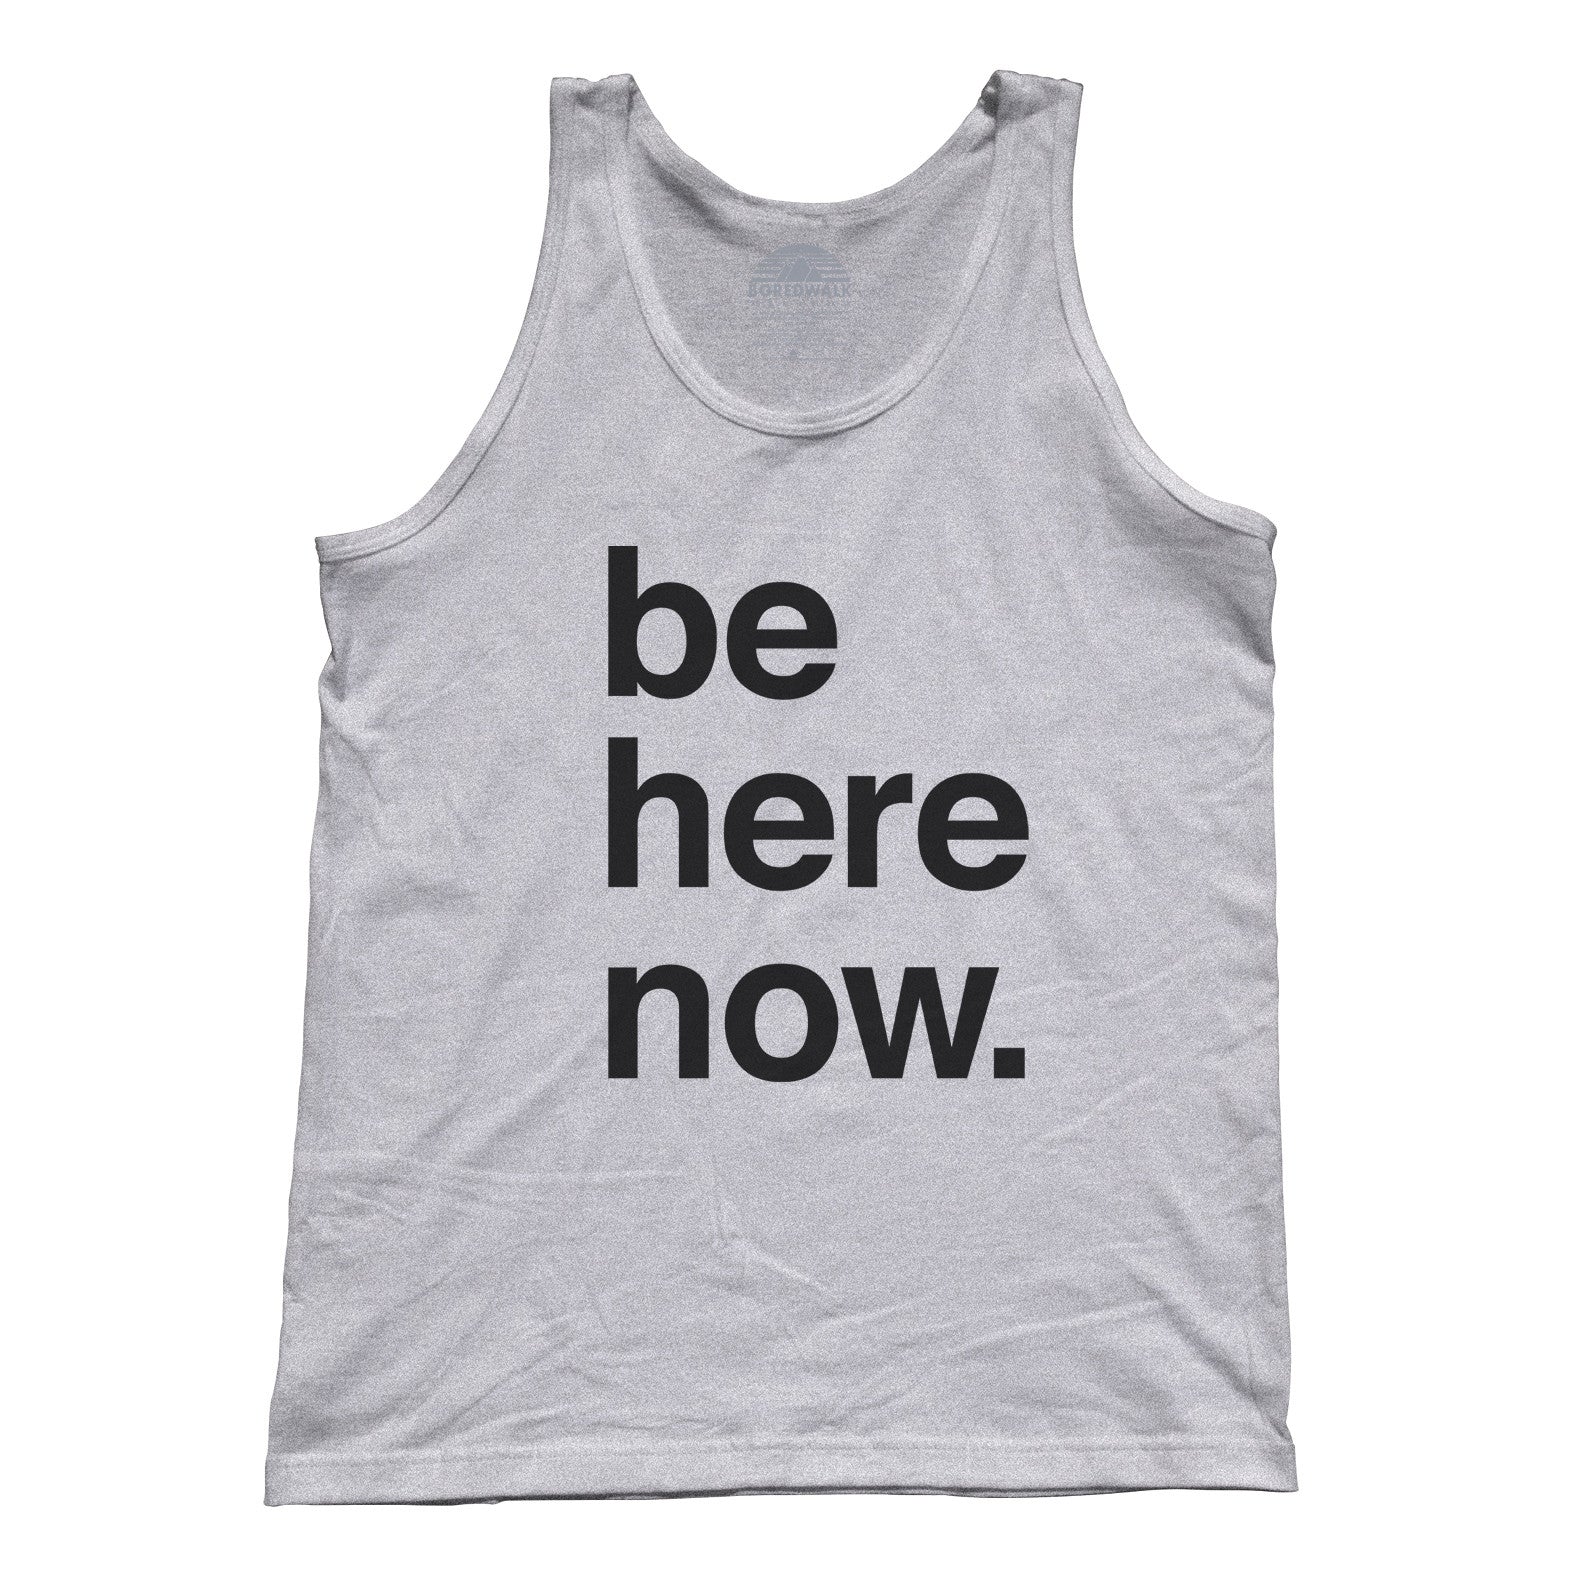 Unisex Be Here Now Tank Top - New Age Mindfulness Meditation Shirt